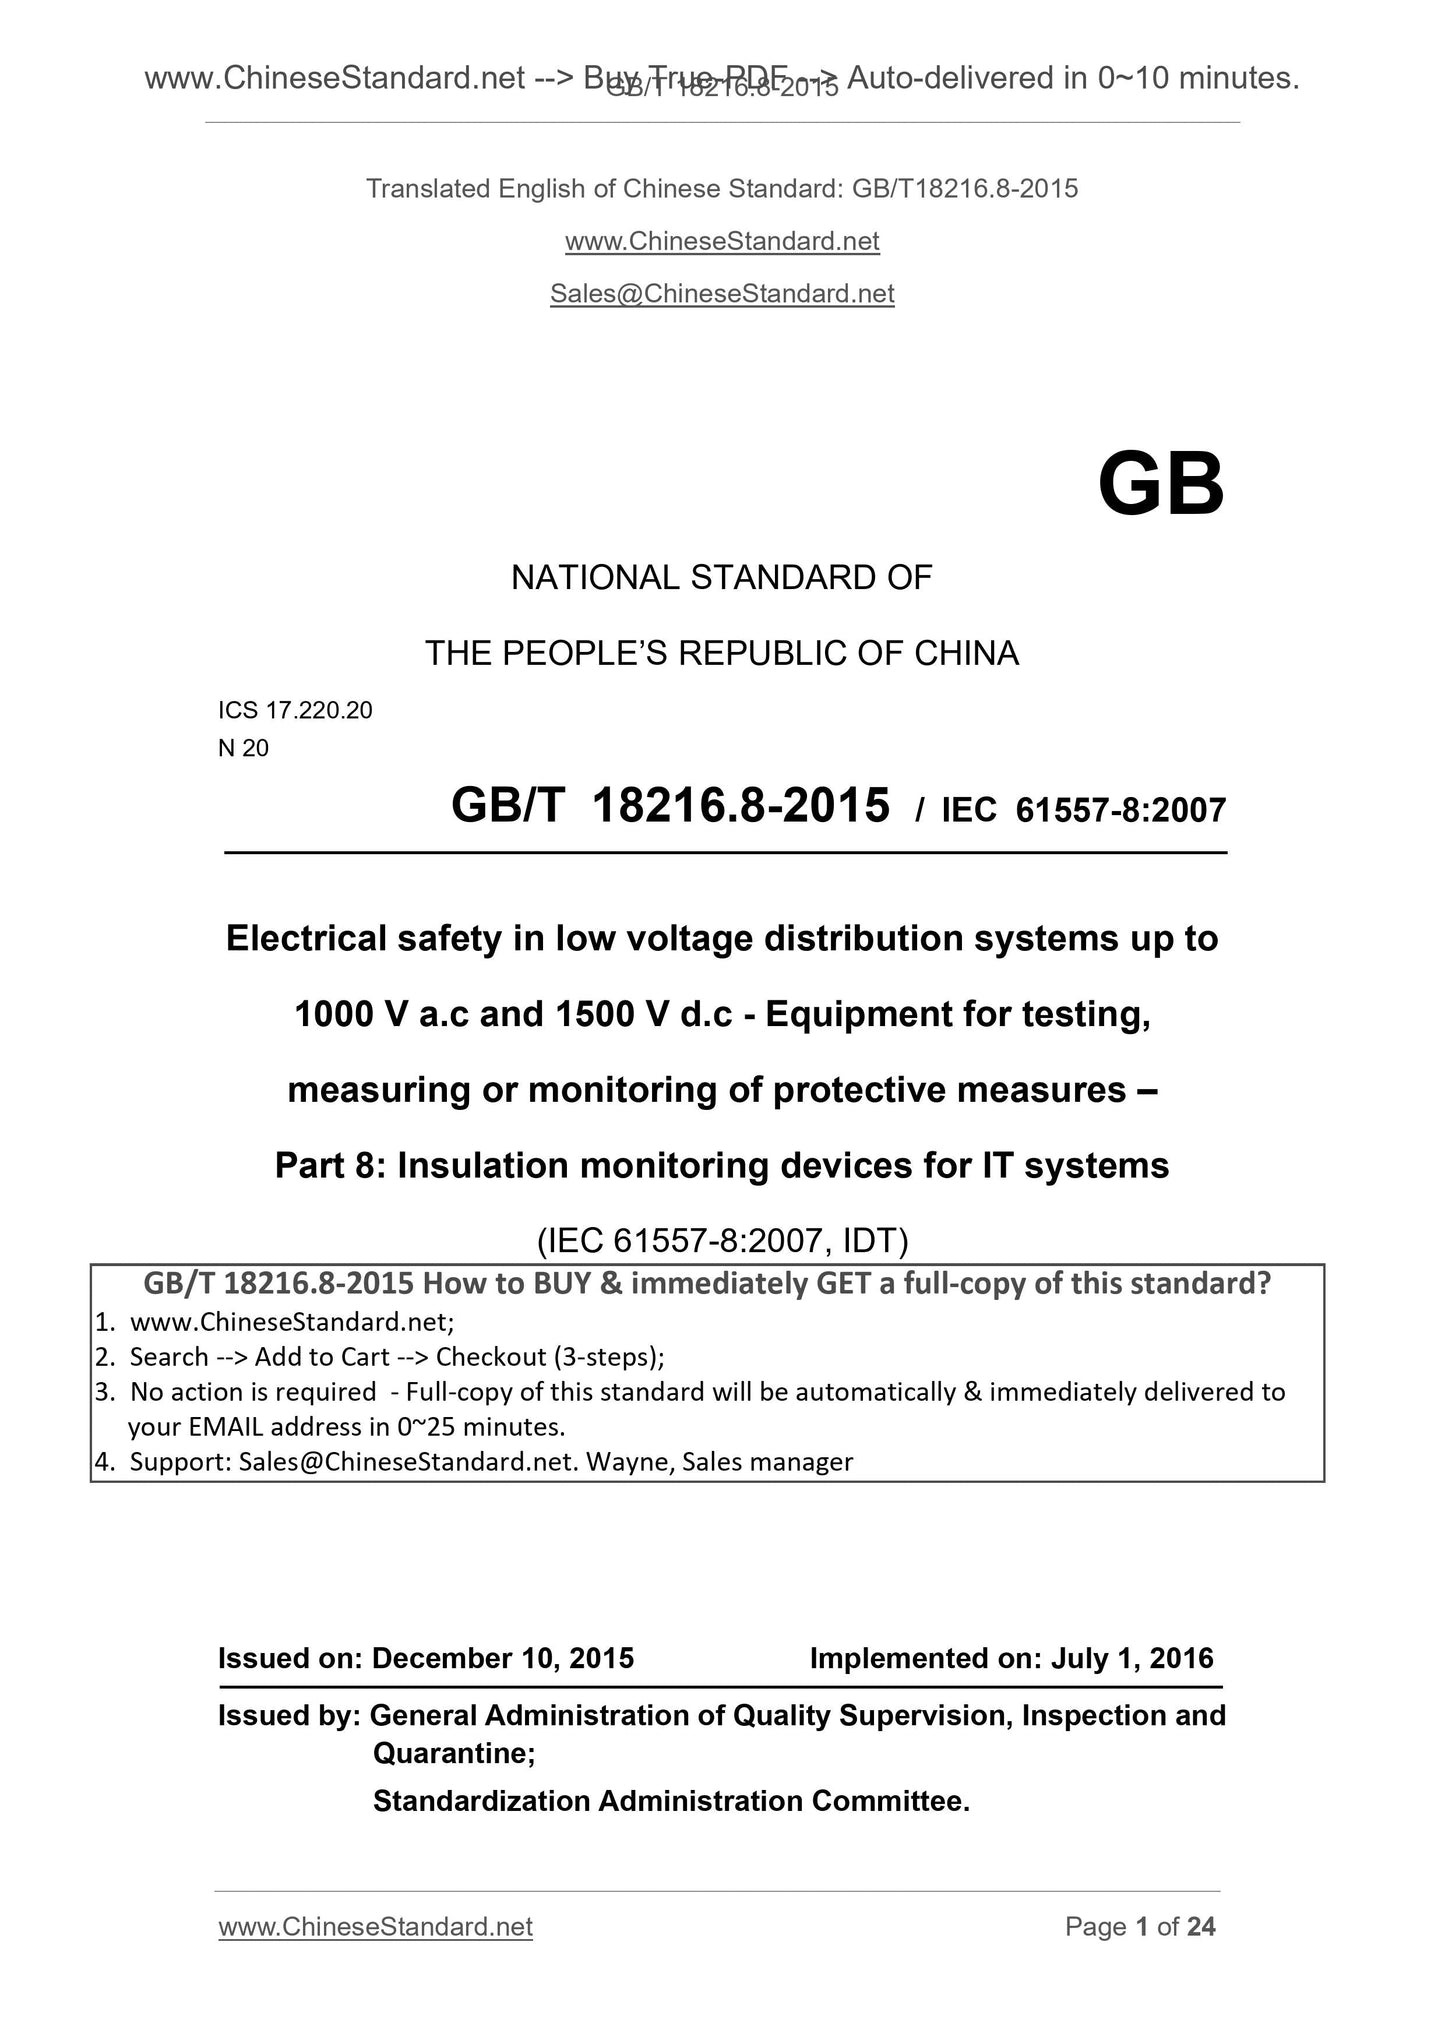 GB/T 18216.8-2015 Page 1